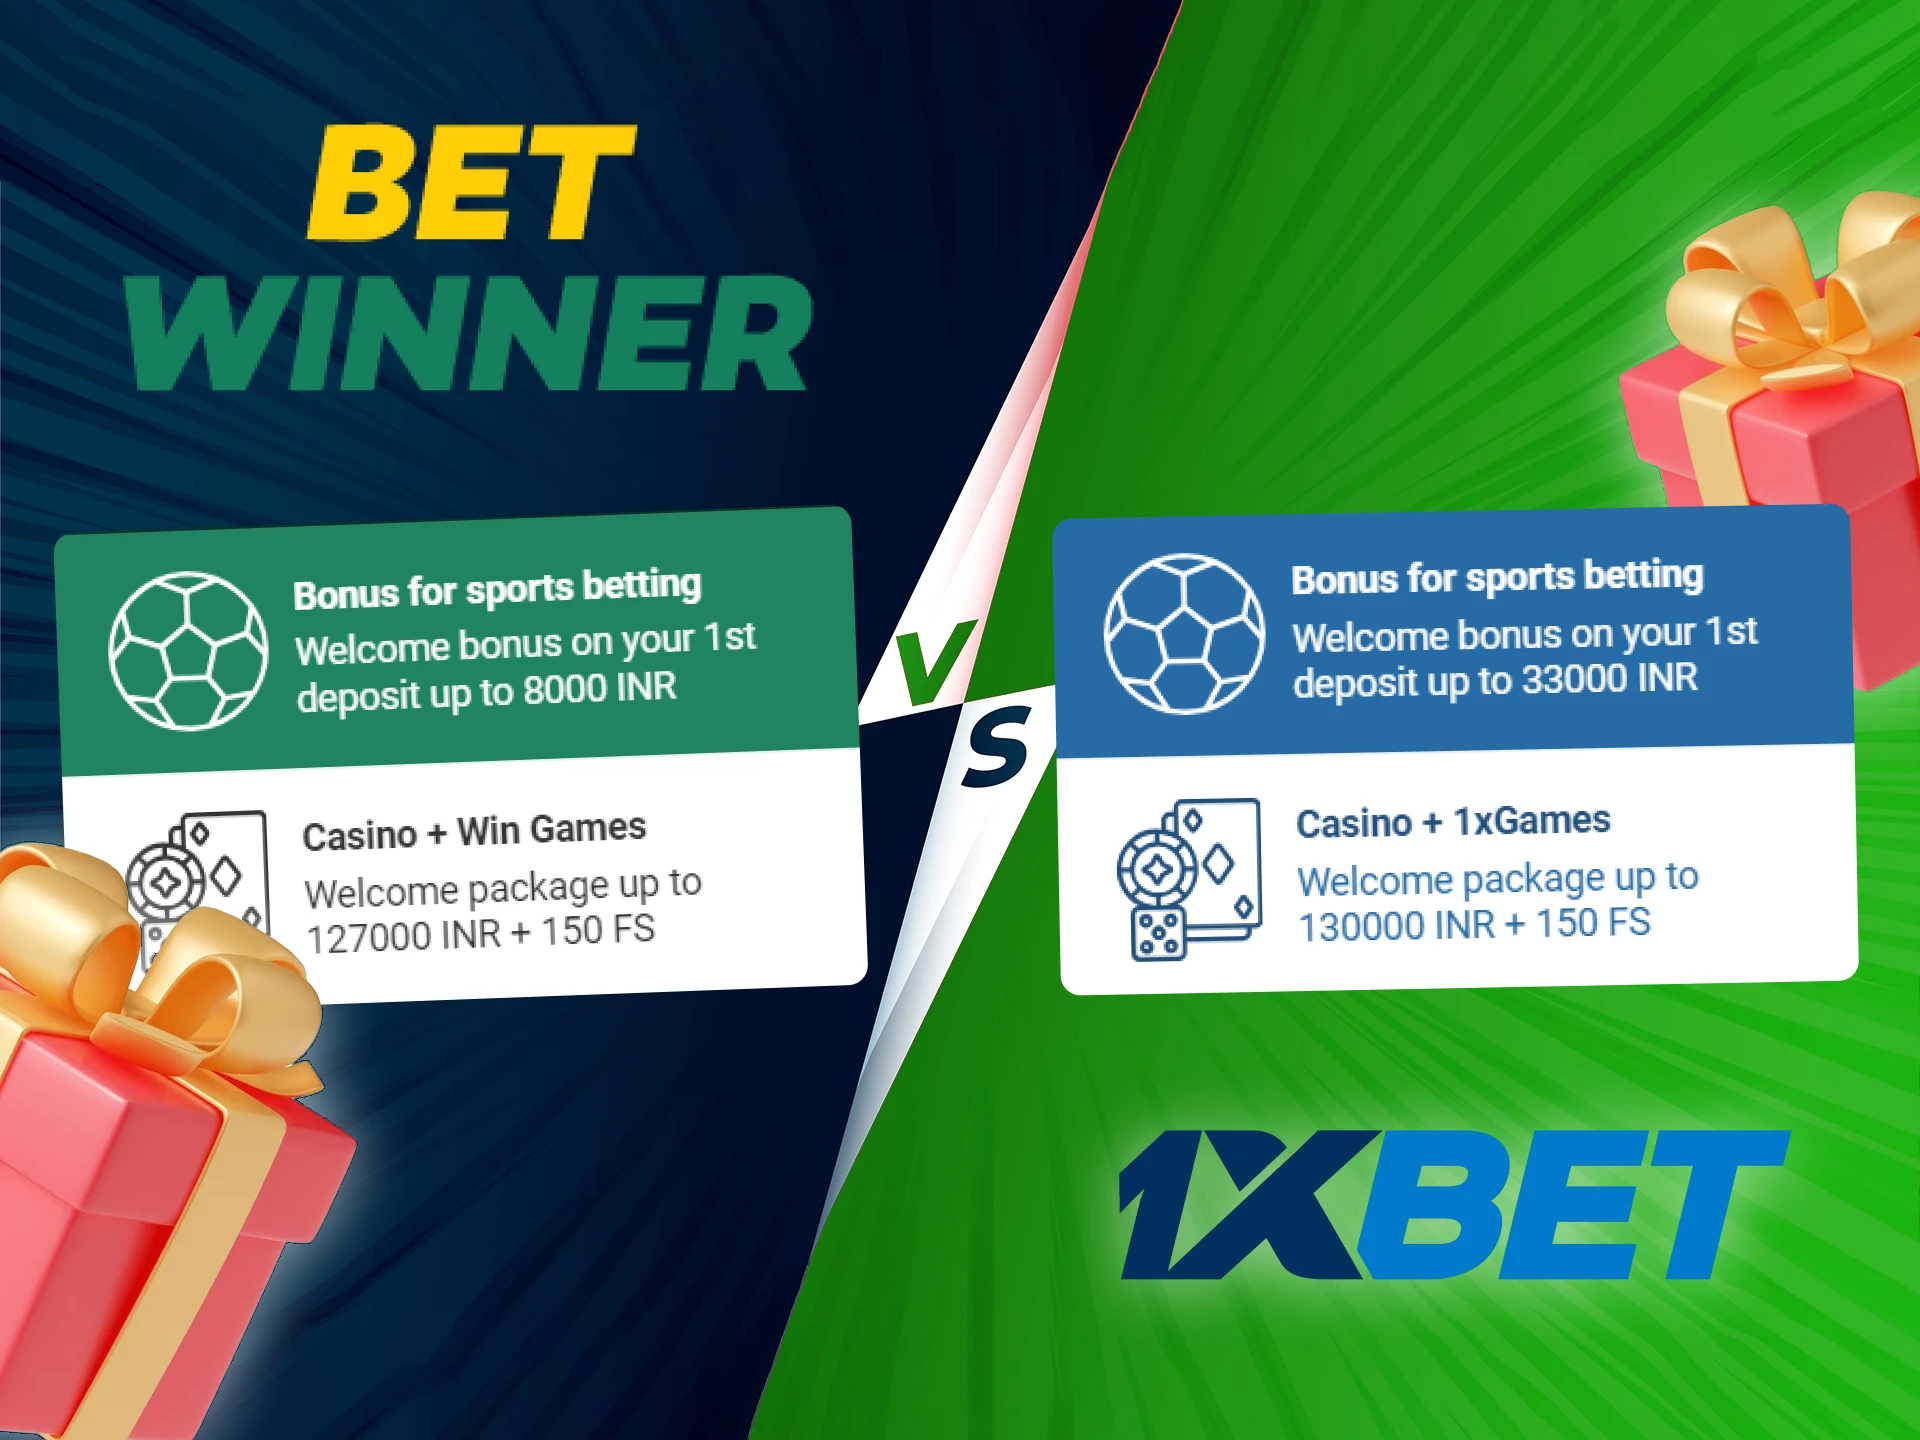 1xbet and Betwinner give their users pleasant welcome bonuses.